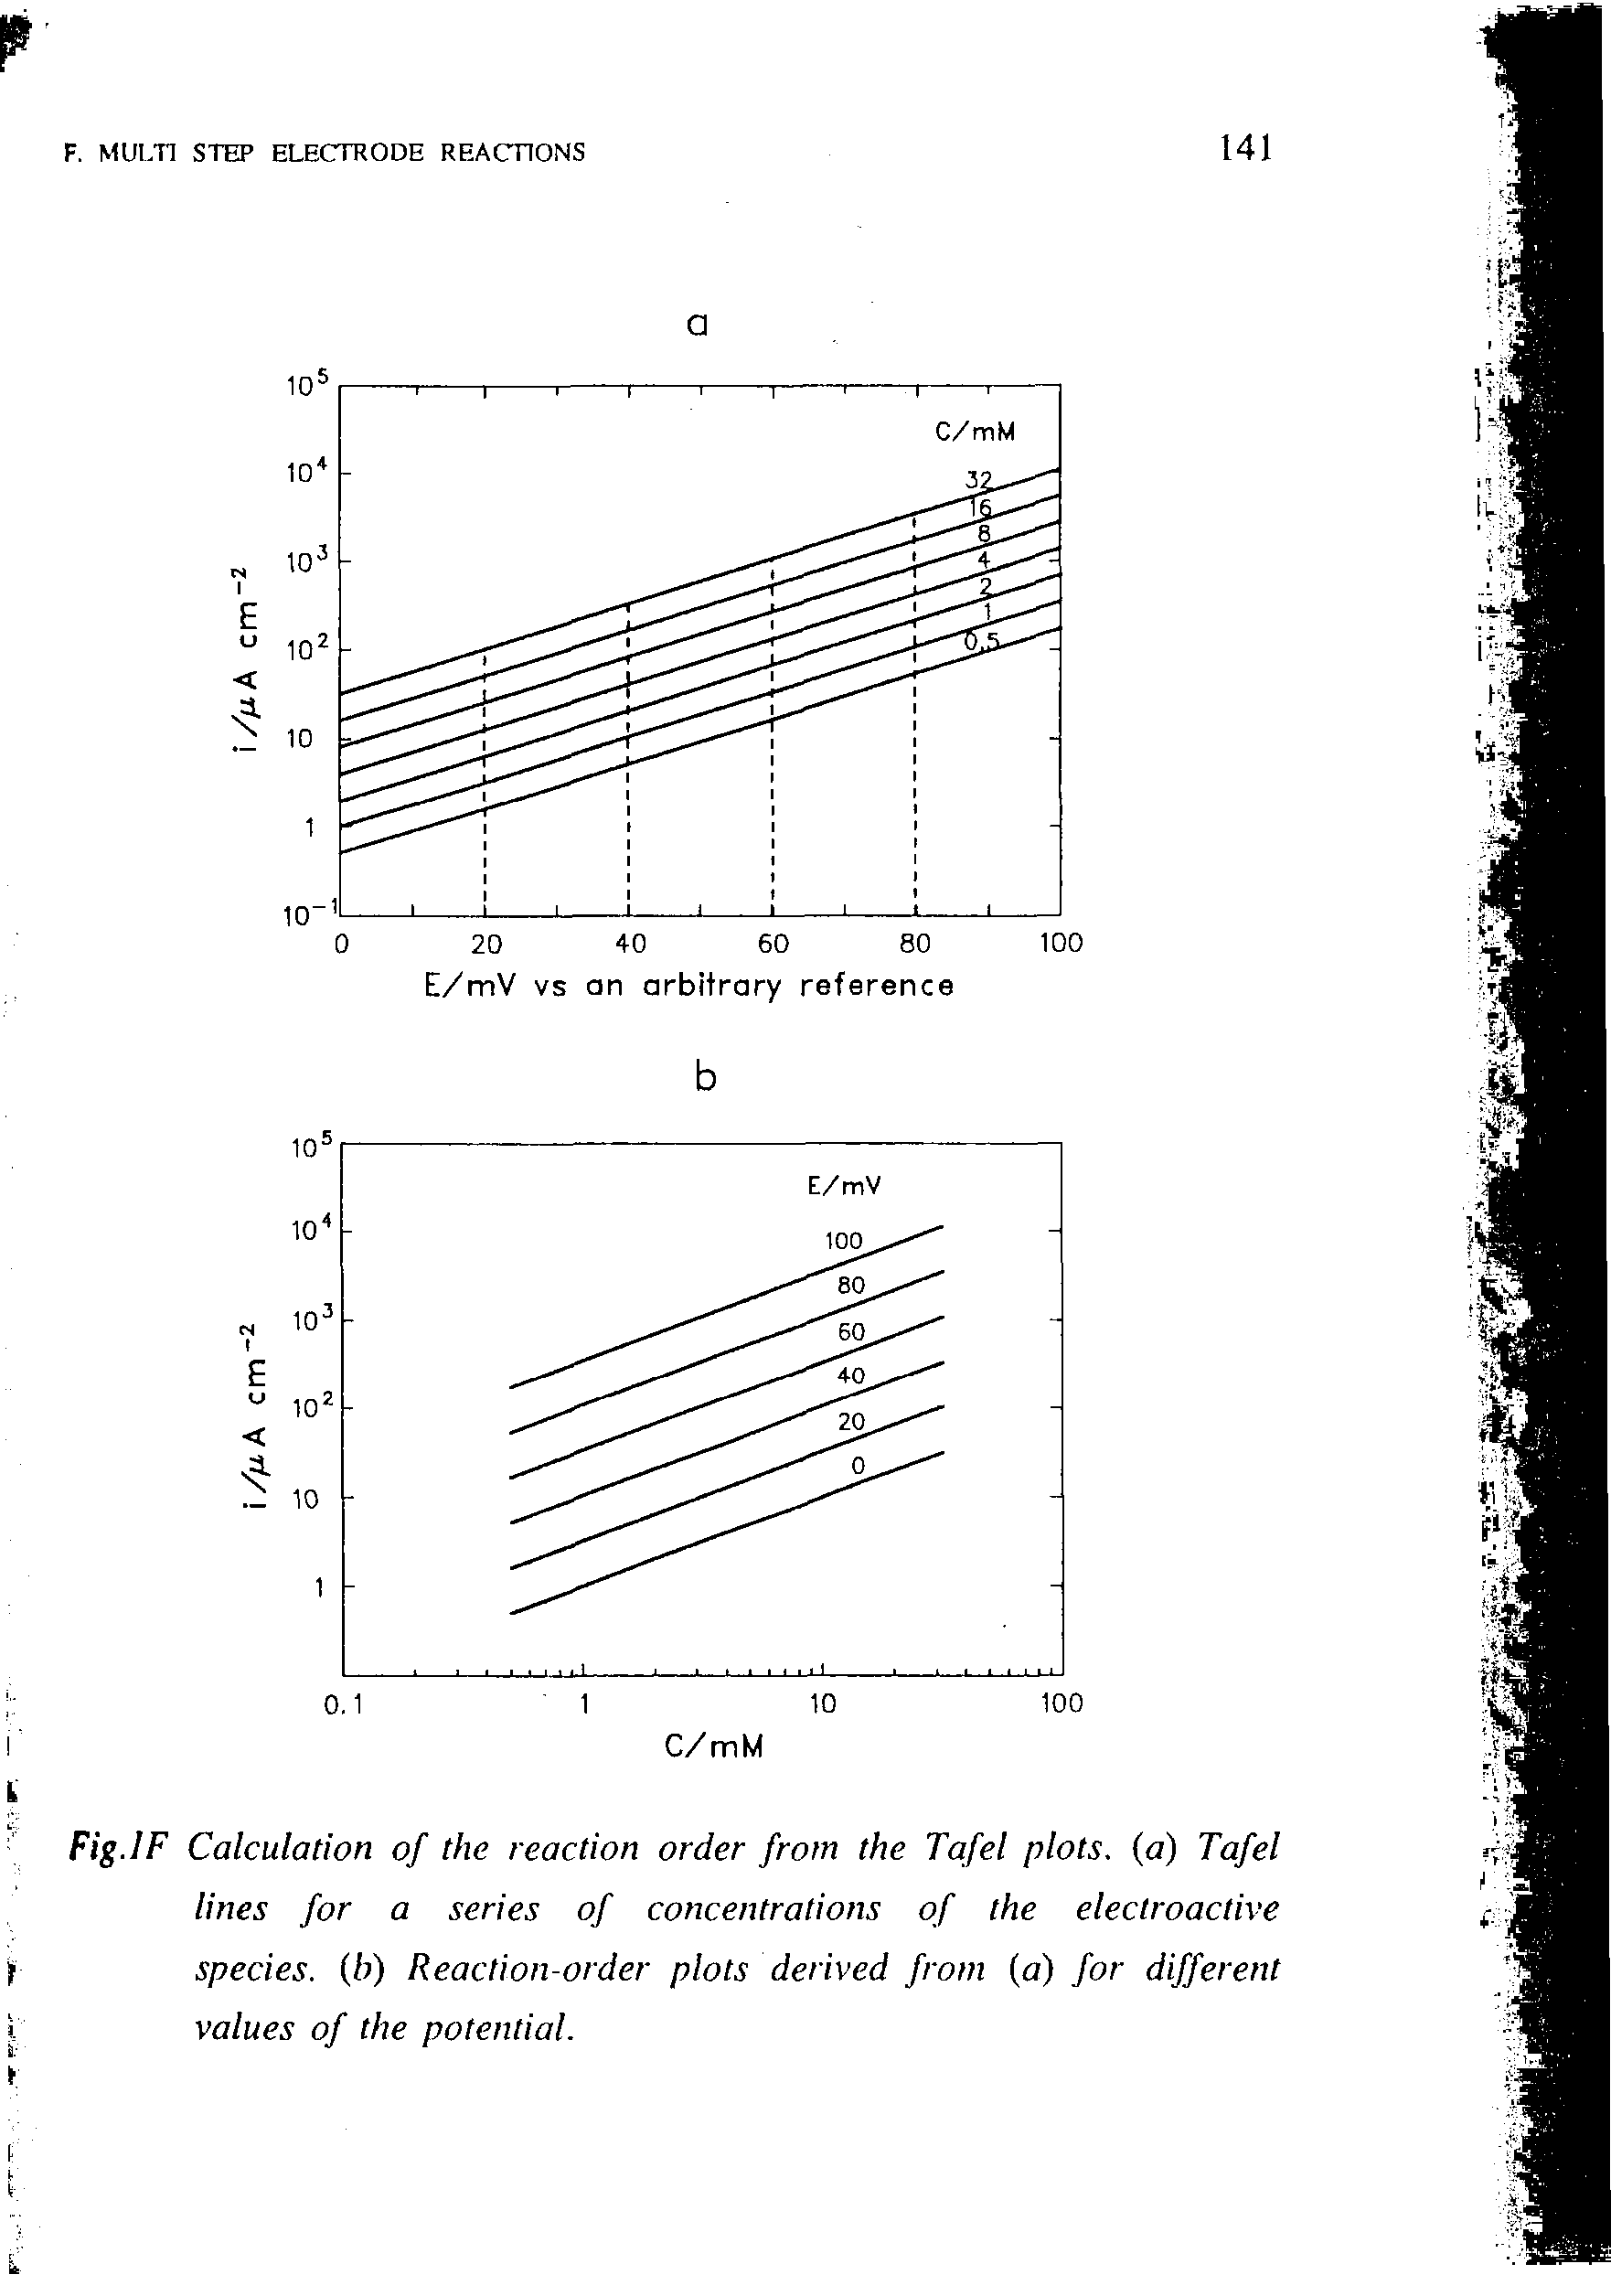 Fig.IF Calculation of the reaction order from the Tafel plots, a) Tafel lines for a series of concentrations of the electroactive jr species, b) Reaction-order plots derived from (a) for different...